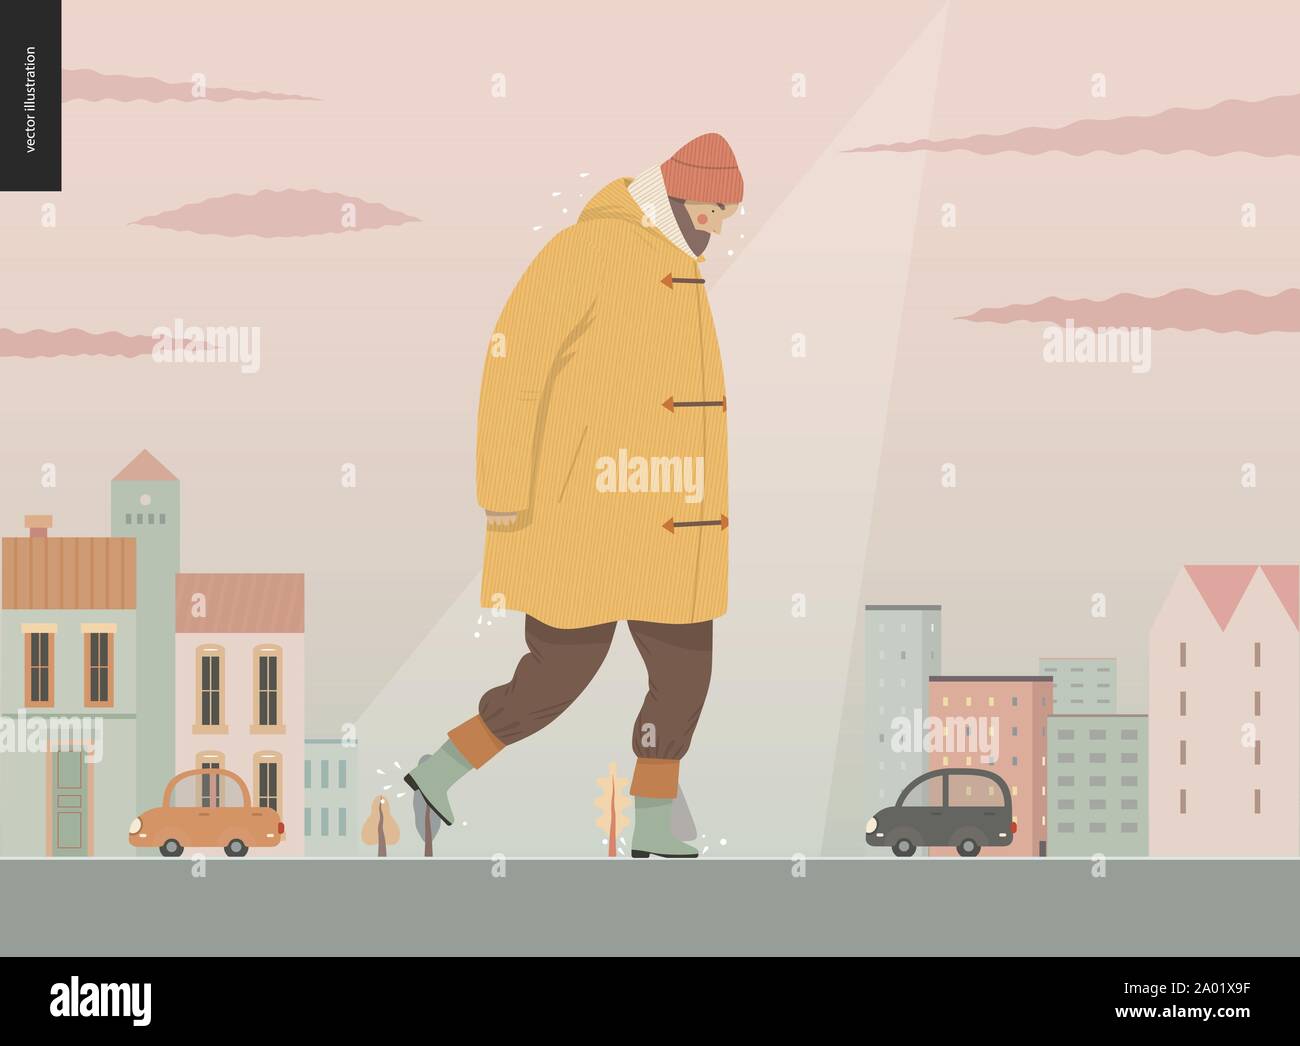 Rain - walking man -modern flat vector concept illustration of a an adult bearded man wearing a coat, a wool cap and boots, walking under the rain in Stock Vector